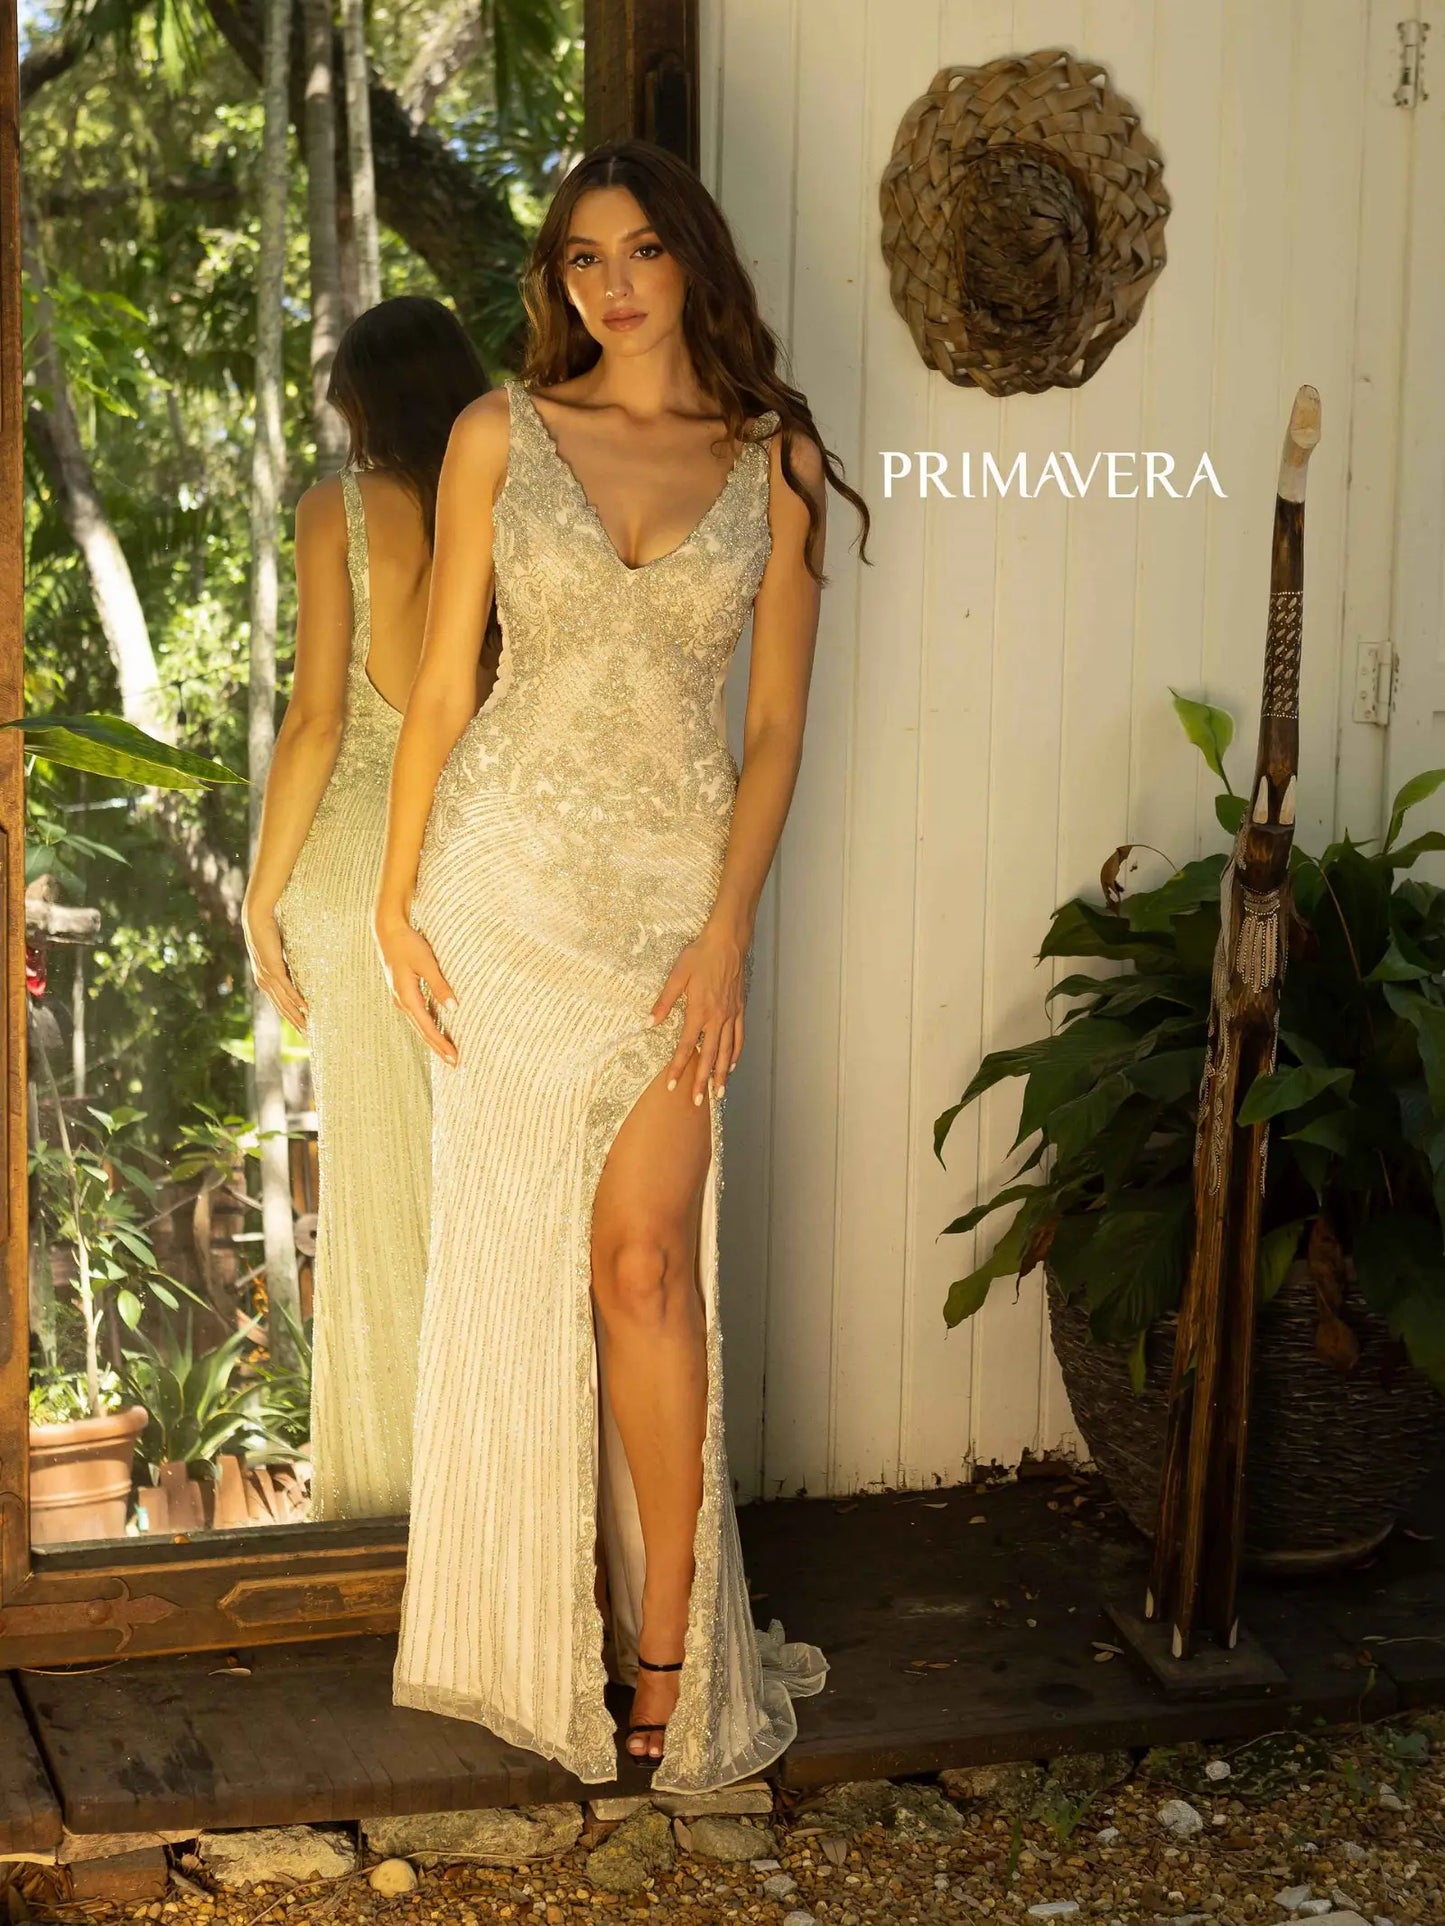 Primavera Couture 12065 Long Fitted Crystal Beaded Prom Dress Slit Pageant Gown Formal v neck  Sizes: 000,00,0,2,4,6,8,10,12,14,16,18,20,22,24  Colors: DARK NUDE, ROSE, NUDE SILVER